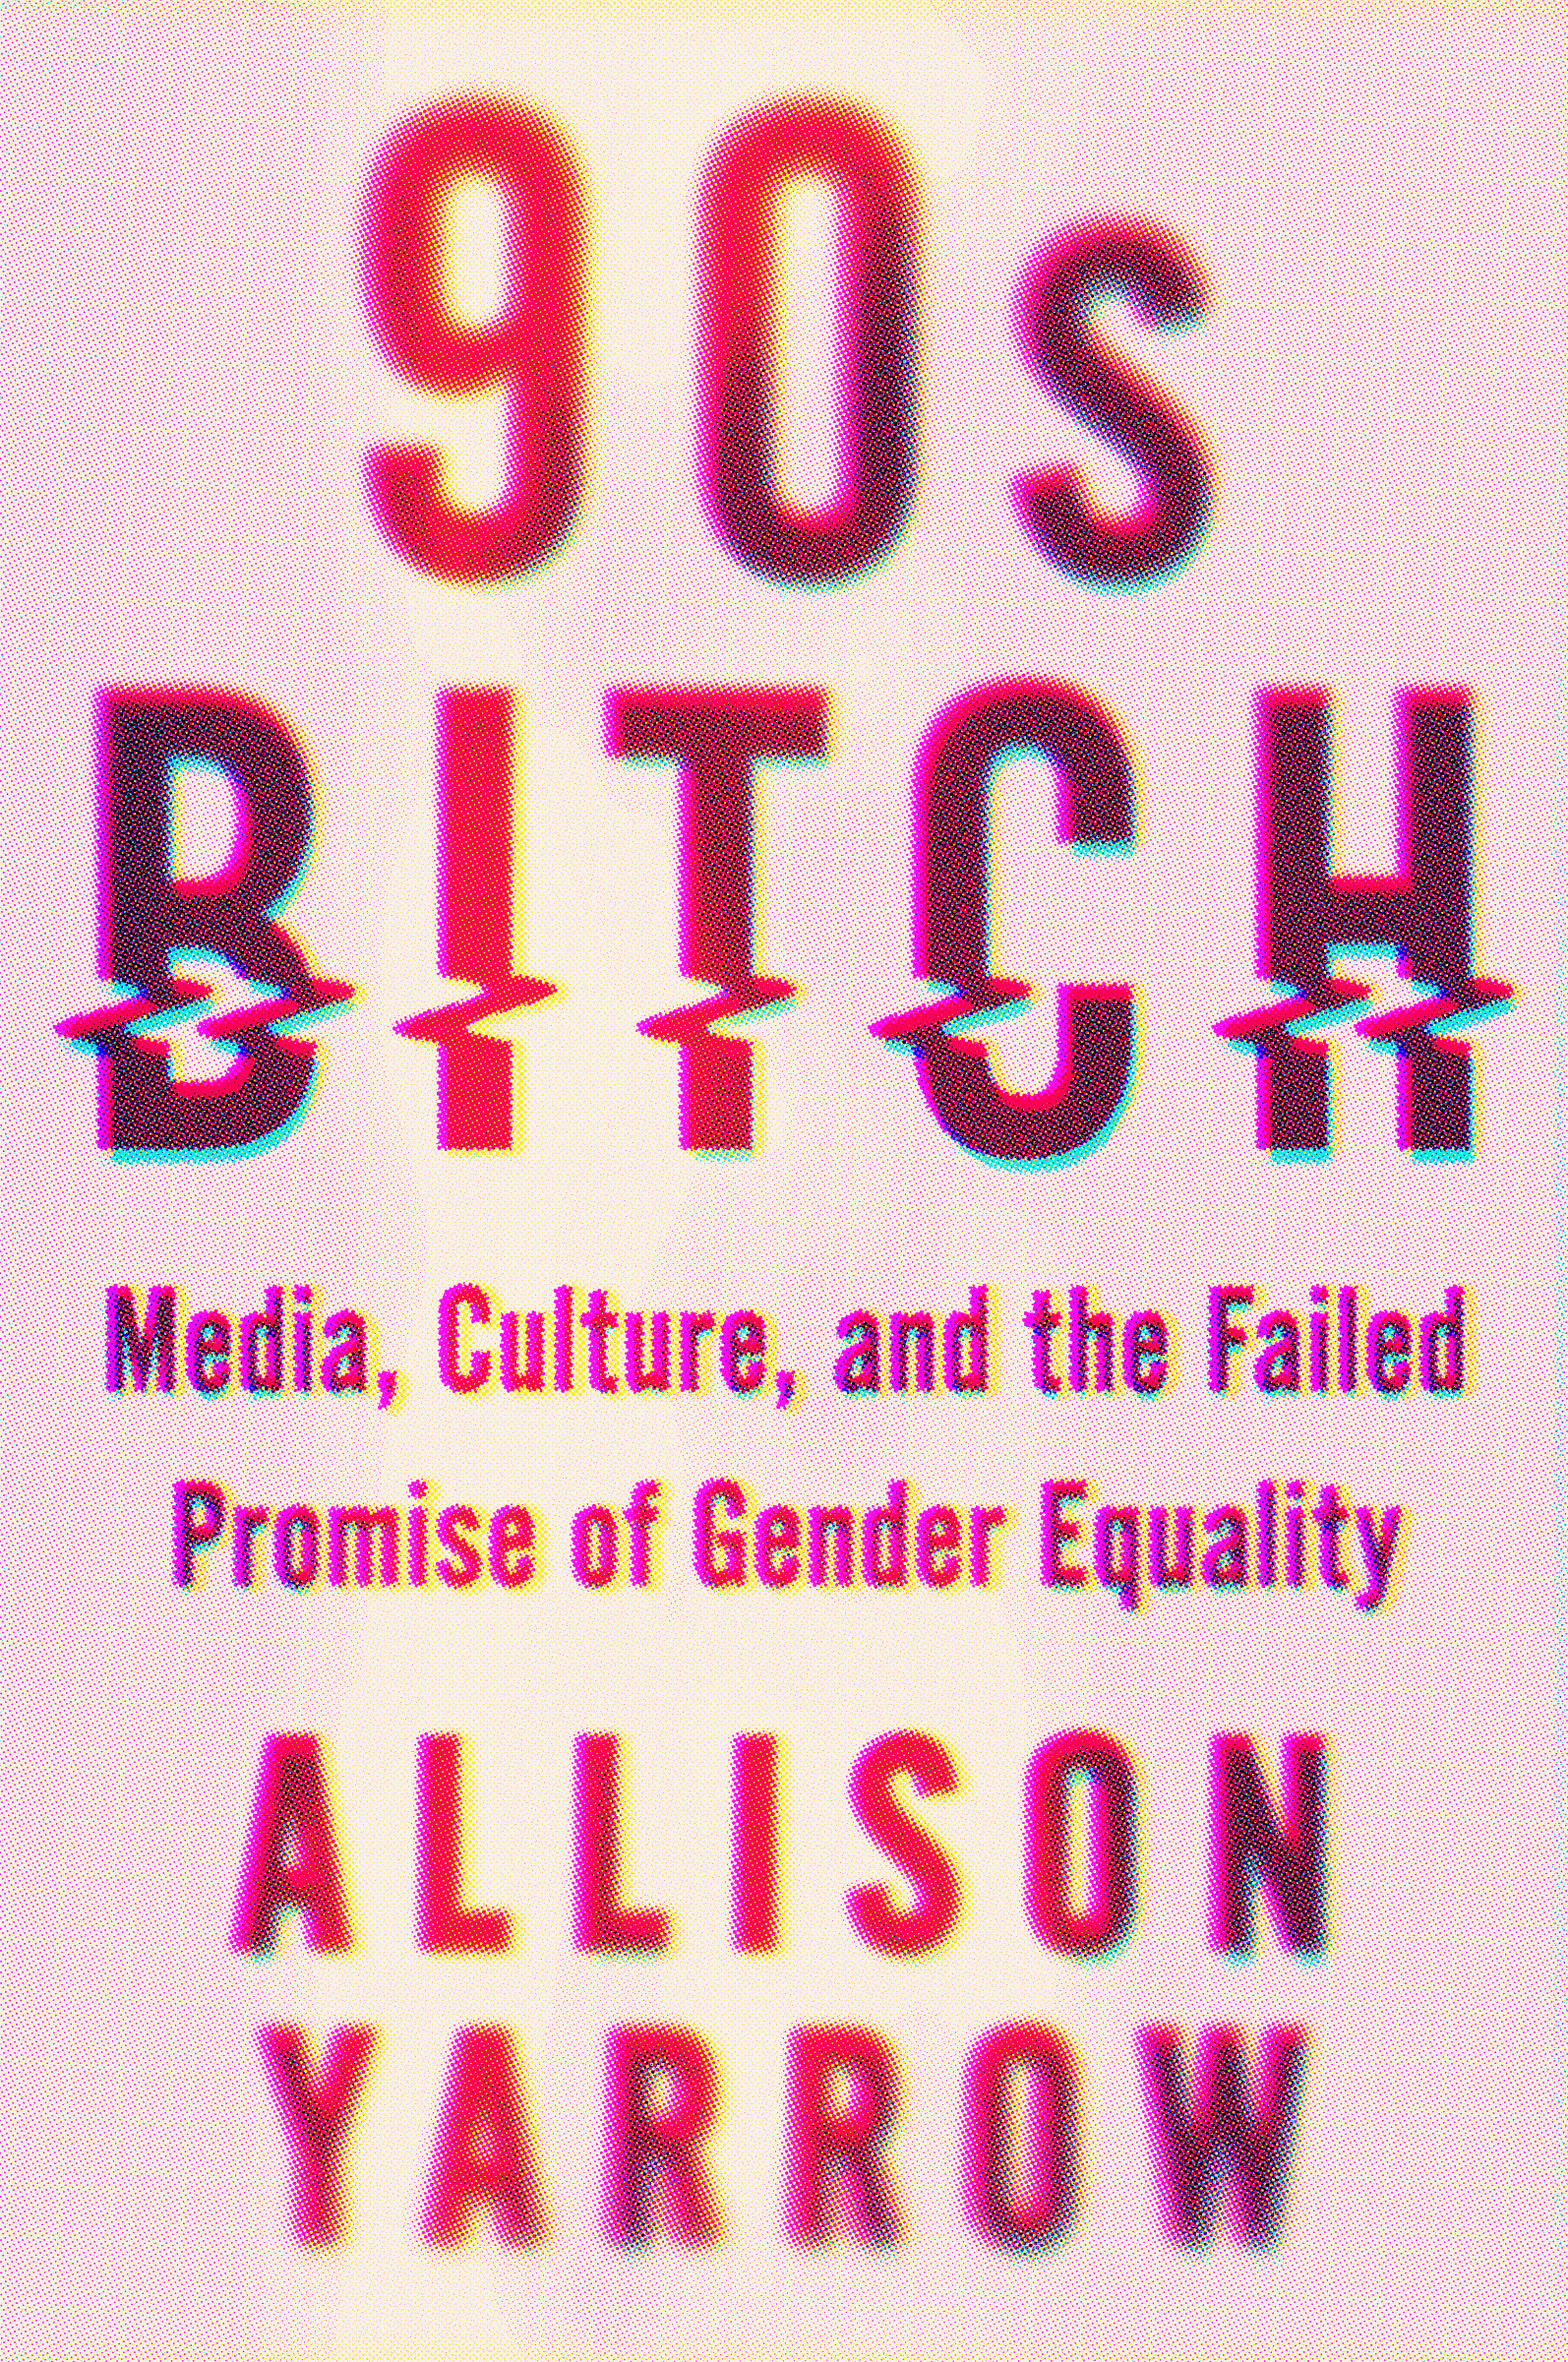 Book Launch: 90s Bitch: Media, Culture, and the Failed Promise of Gender Equality by Allison Yarrow — in conversation w/ Reshma Saujani